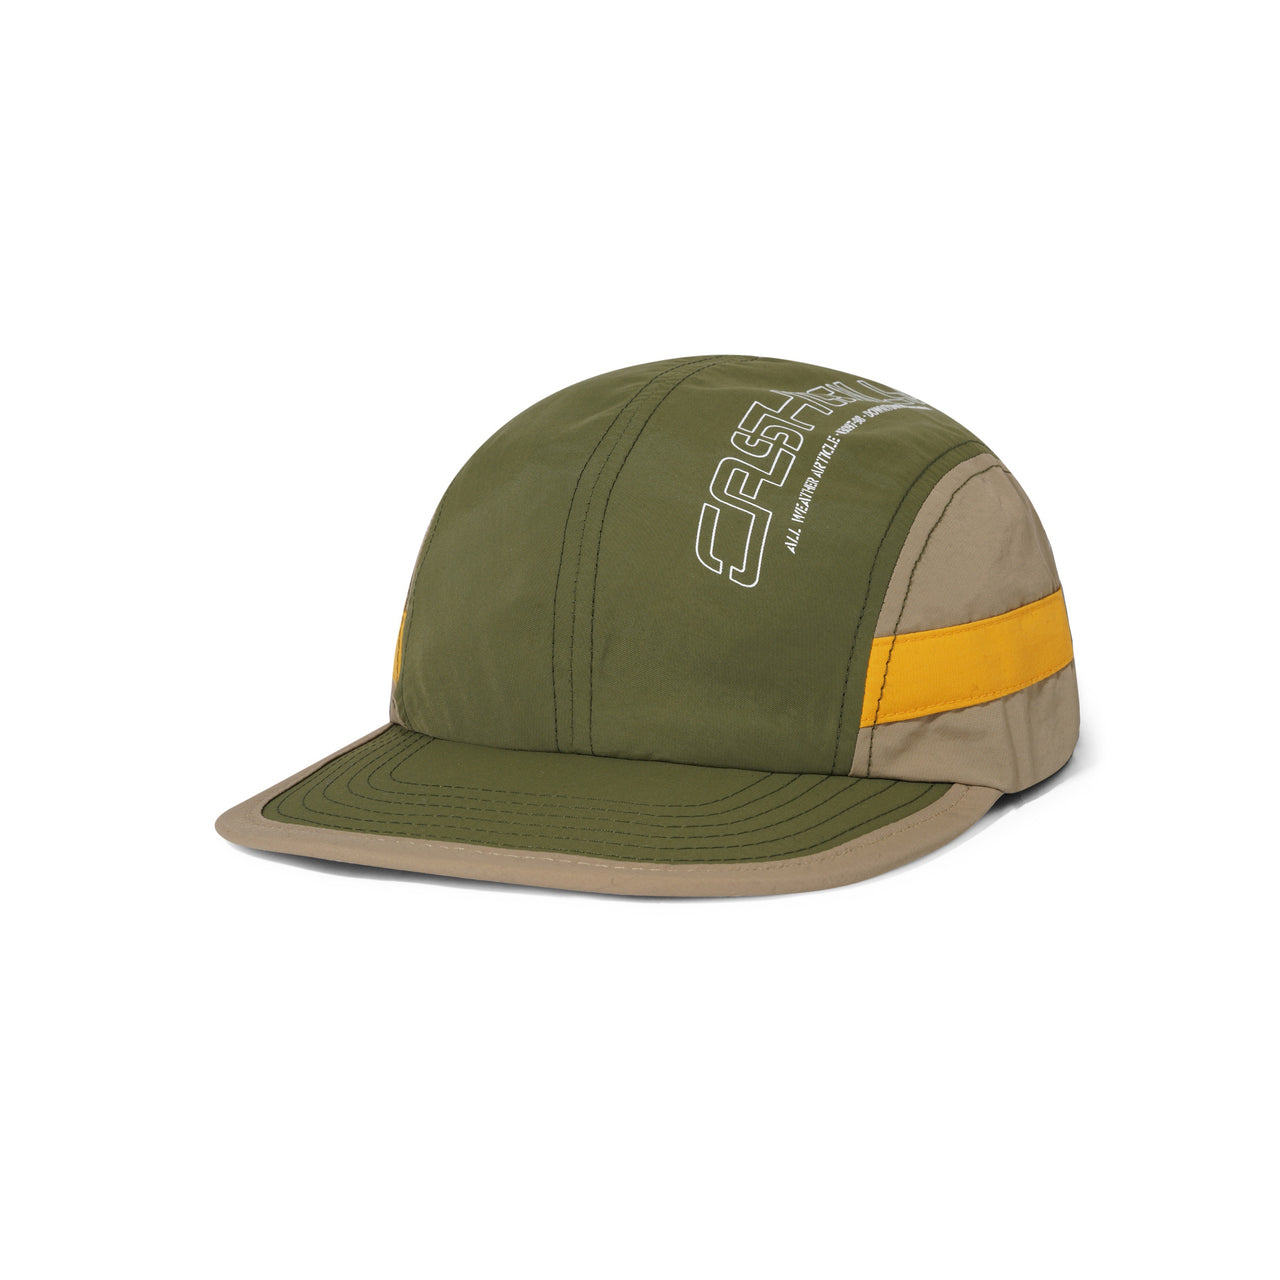 CASH ONLY - ALL WEATHER 4 PANEL CAP - ARMY